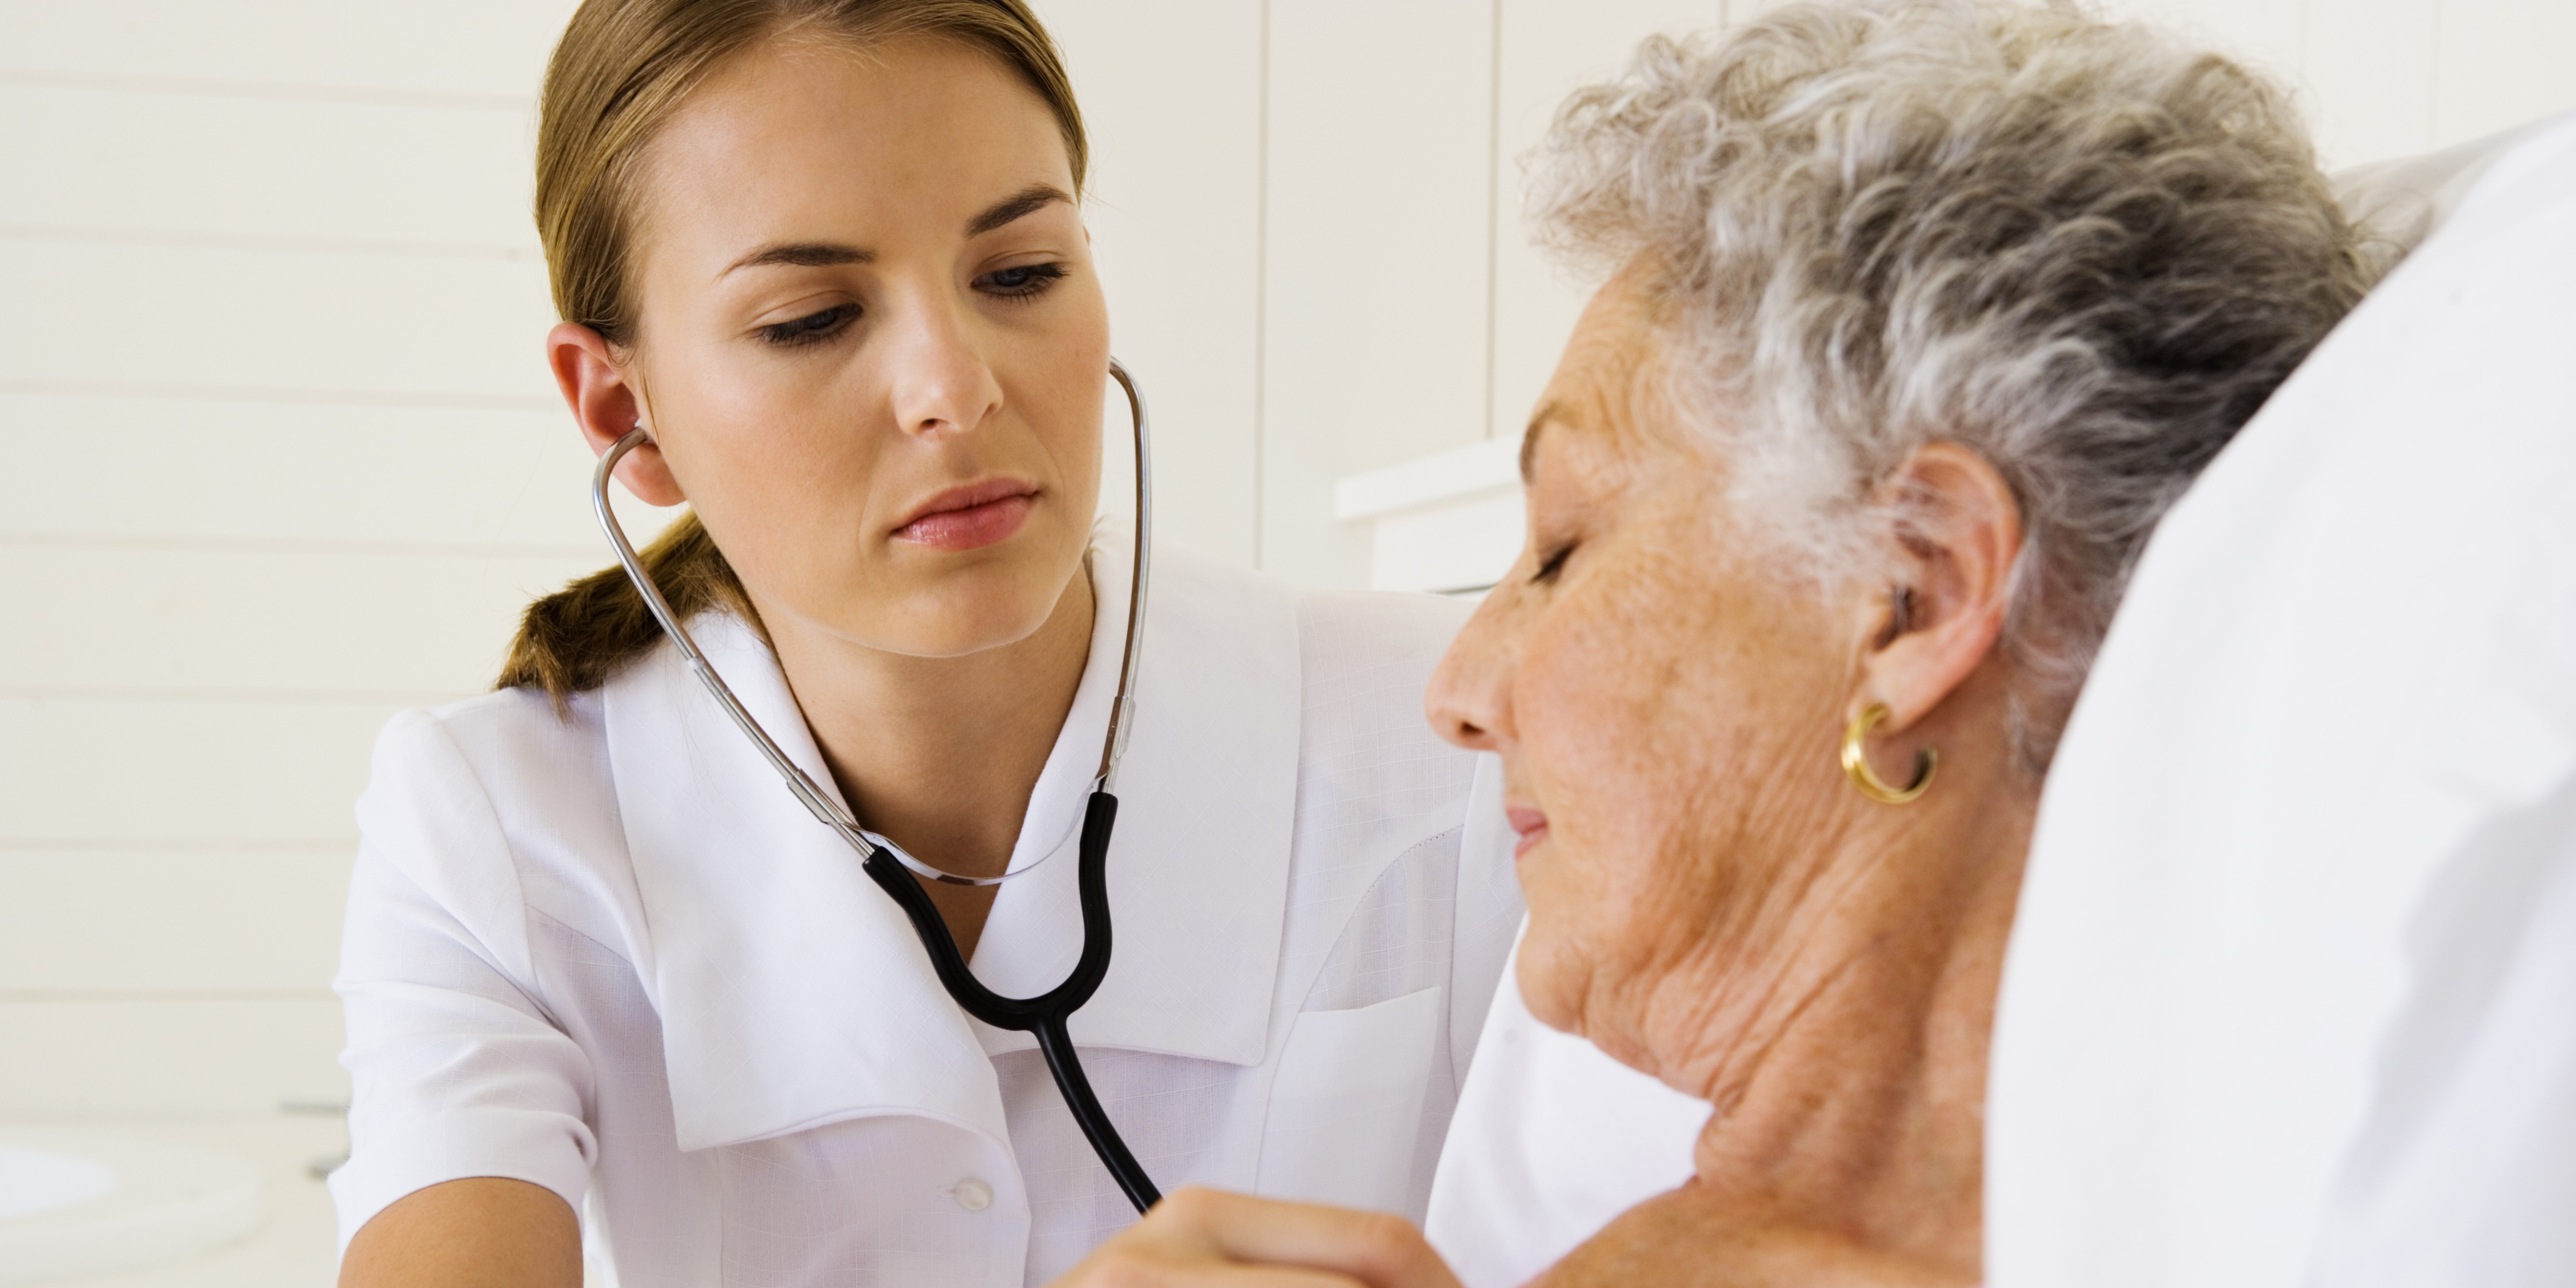 health practitioner using stethoscope to evaluate senior woman